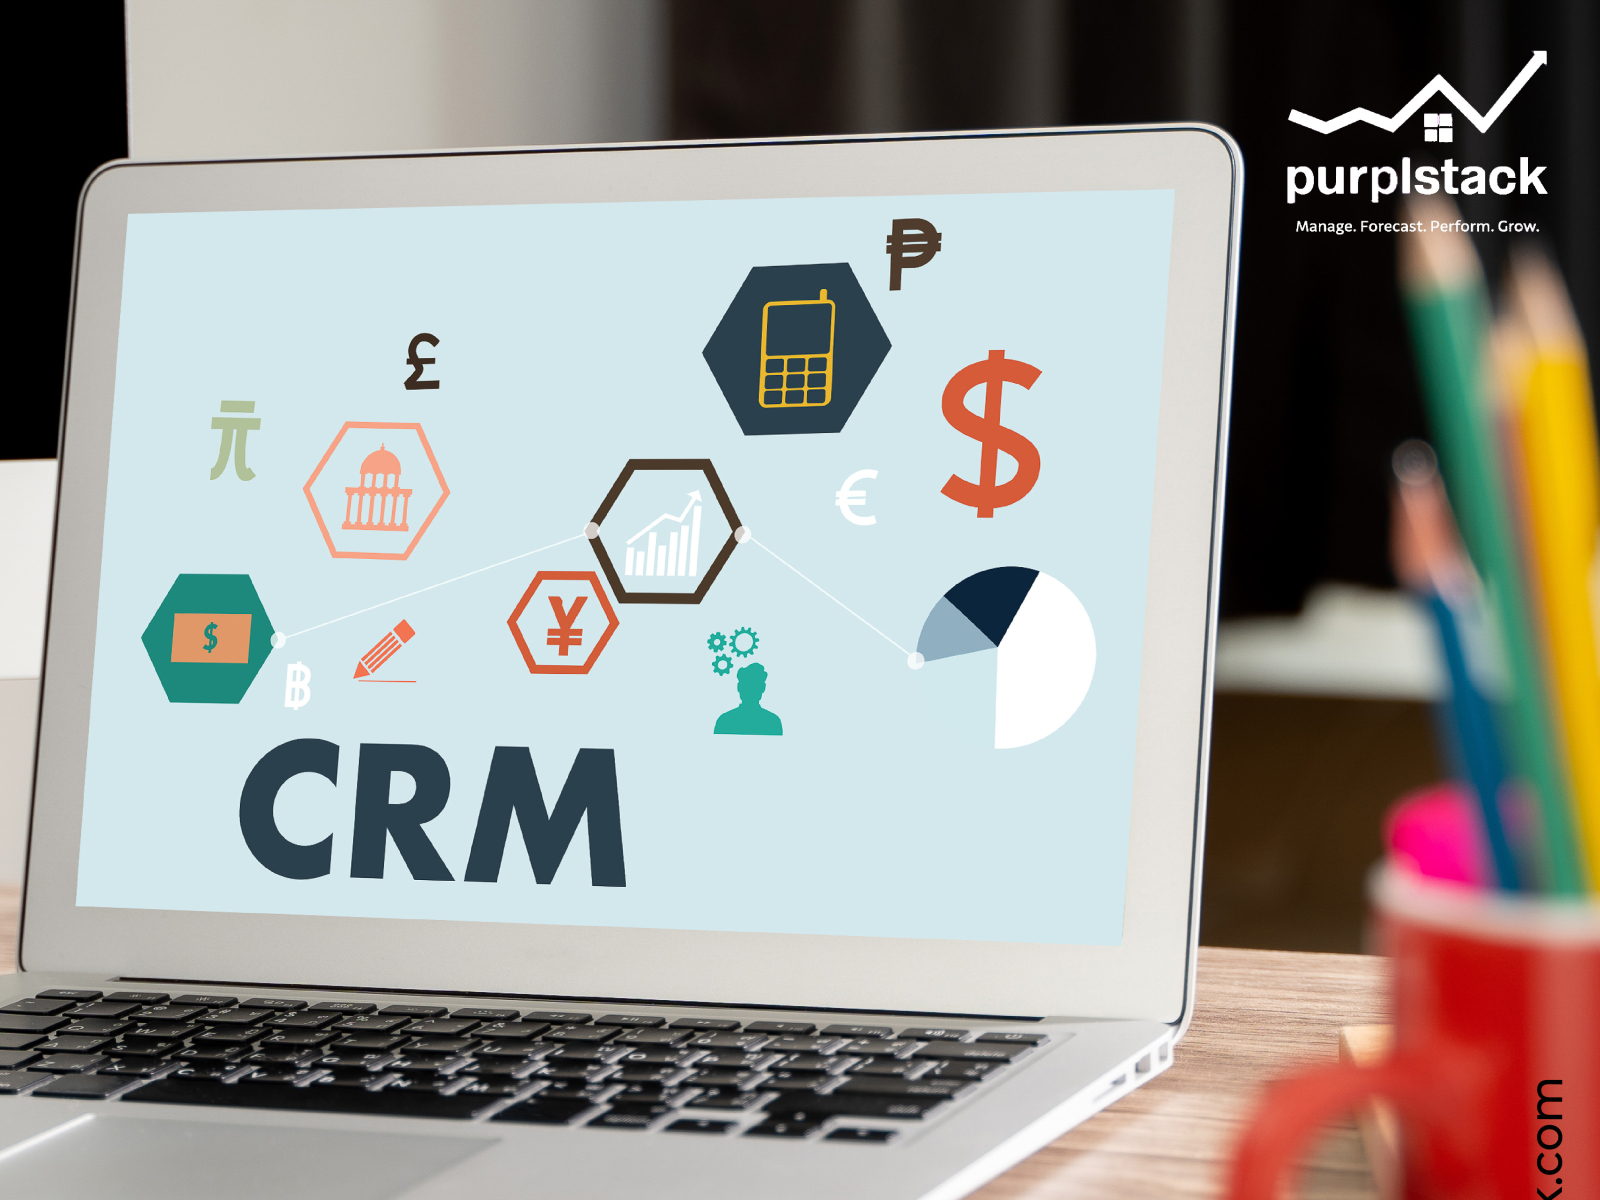 Real estate CRM software India | Purplestack CRM software by Purpl stack on Dribbble